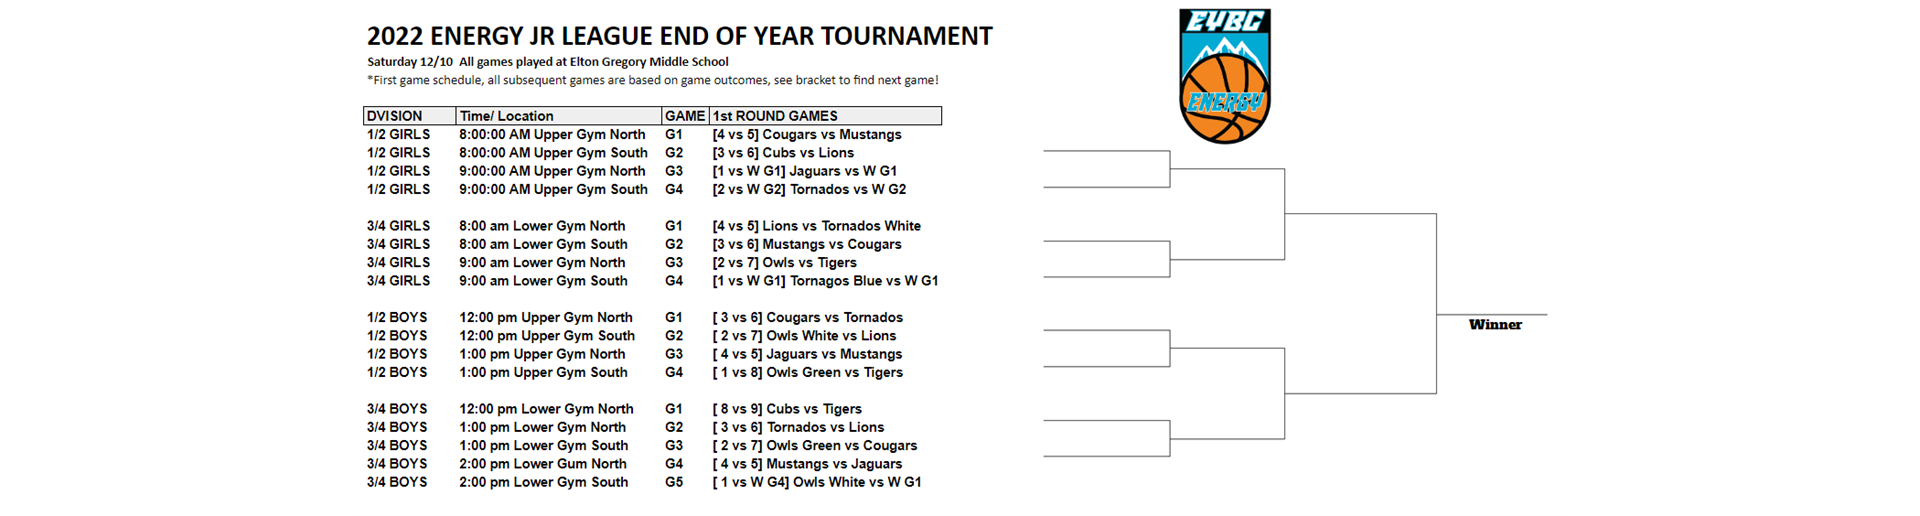 2022 End of Year Tournament